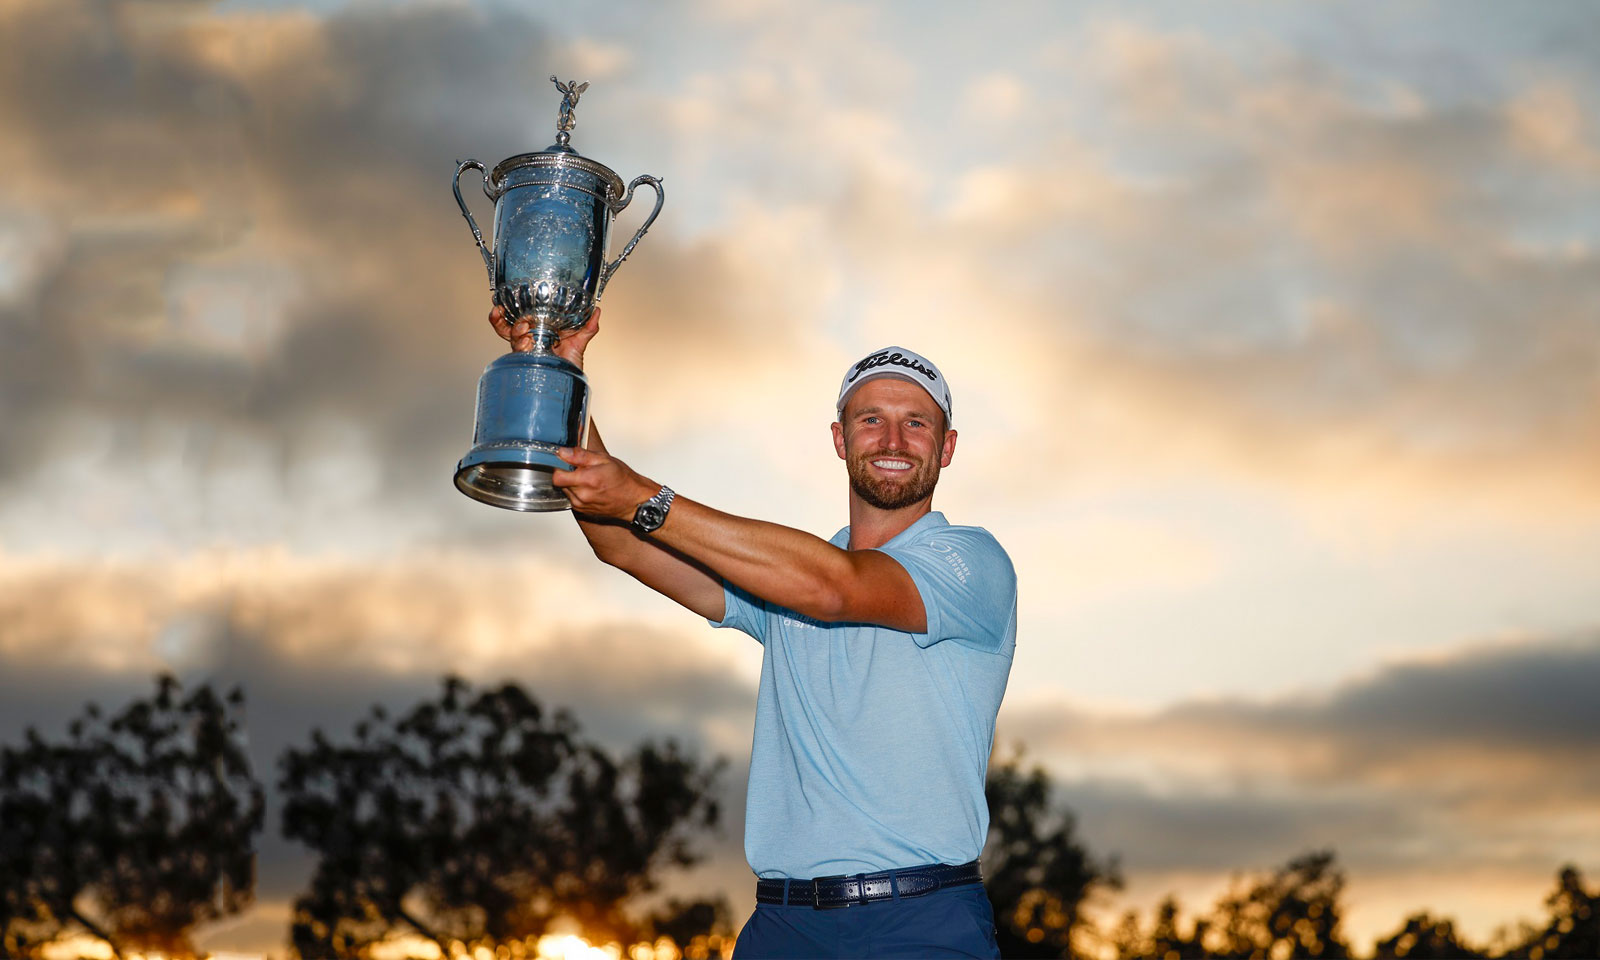 29-year-old Wyndham Clark from Denver overcomes Rory McIlroy, Rickie Fowler, and Scottie Scheffler to claim first major title